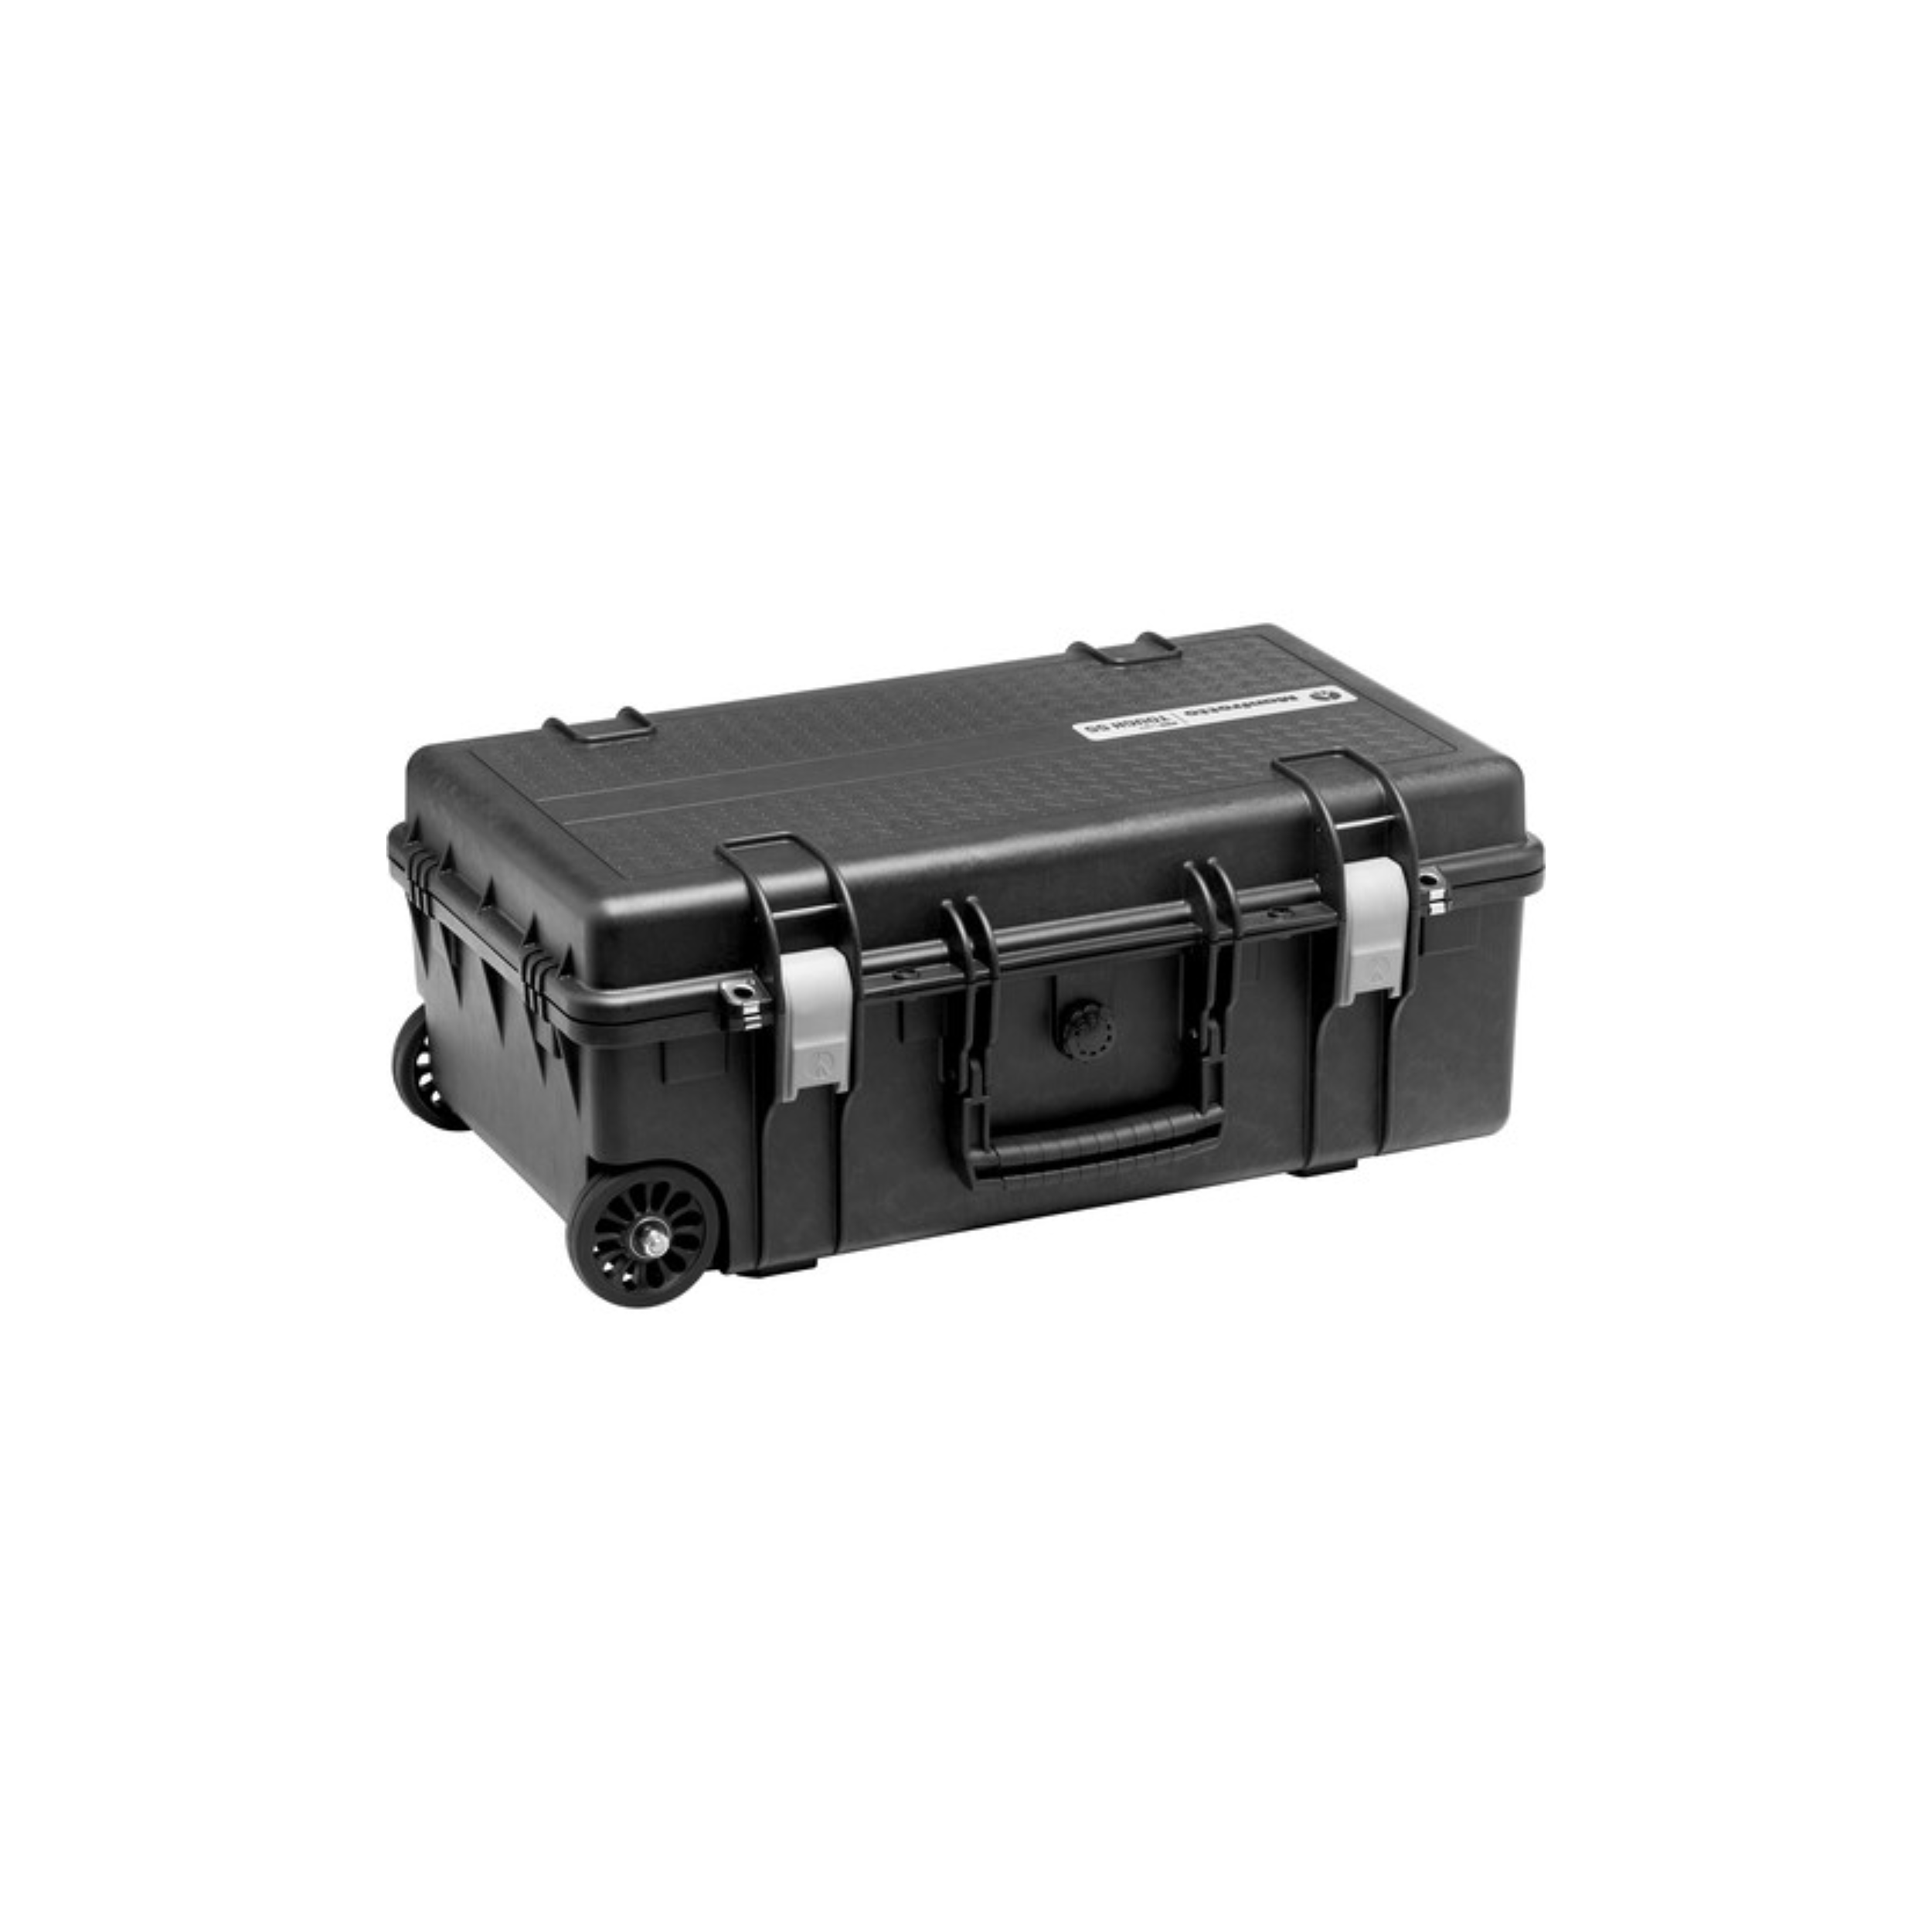 Manfrotto MB-PL-RL-TH55-F Pro Light Reloader Tough-55 High Lid Wheeled Hard Case with Foam Insert